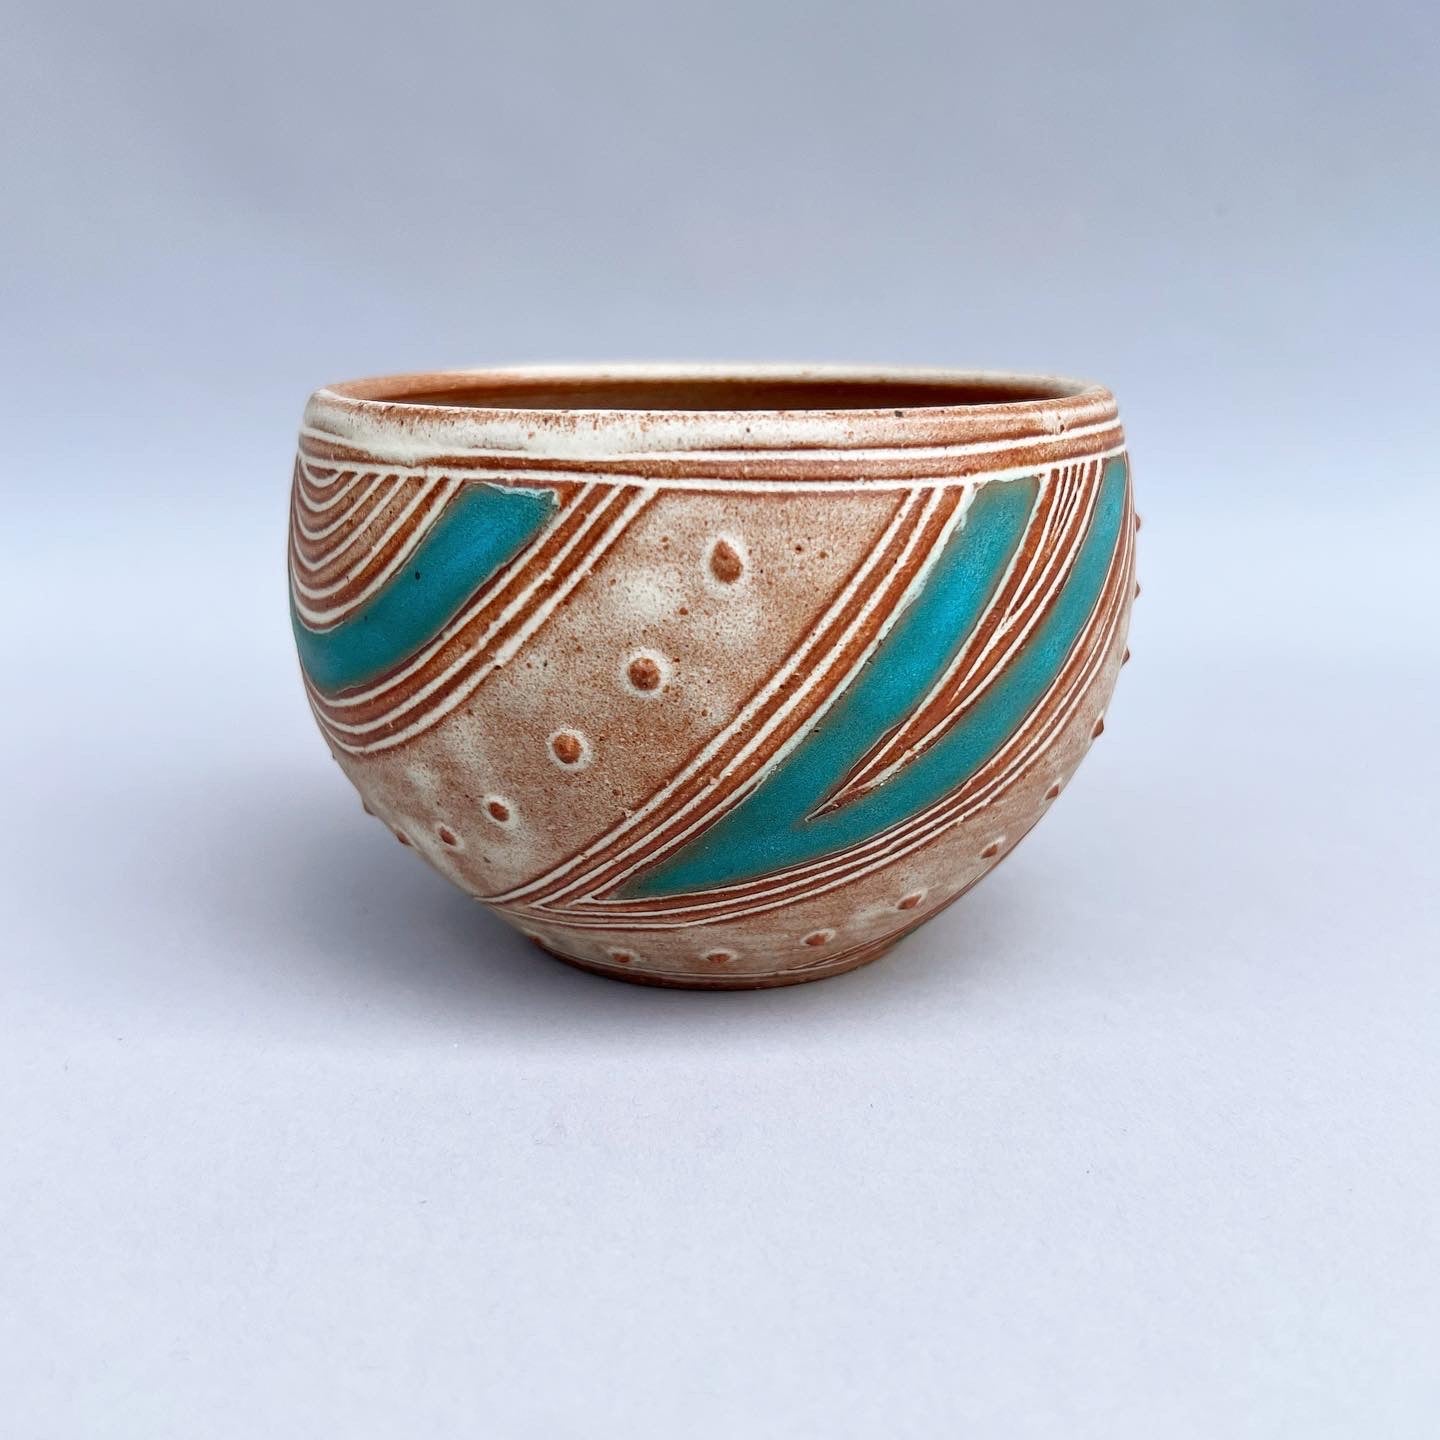 Turquoise Shapes Cereal Bowl